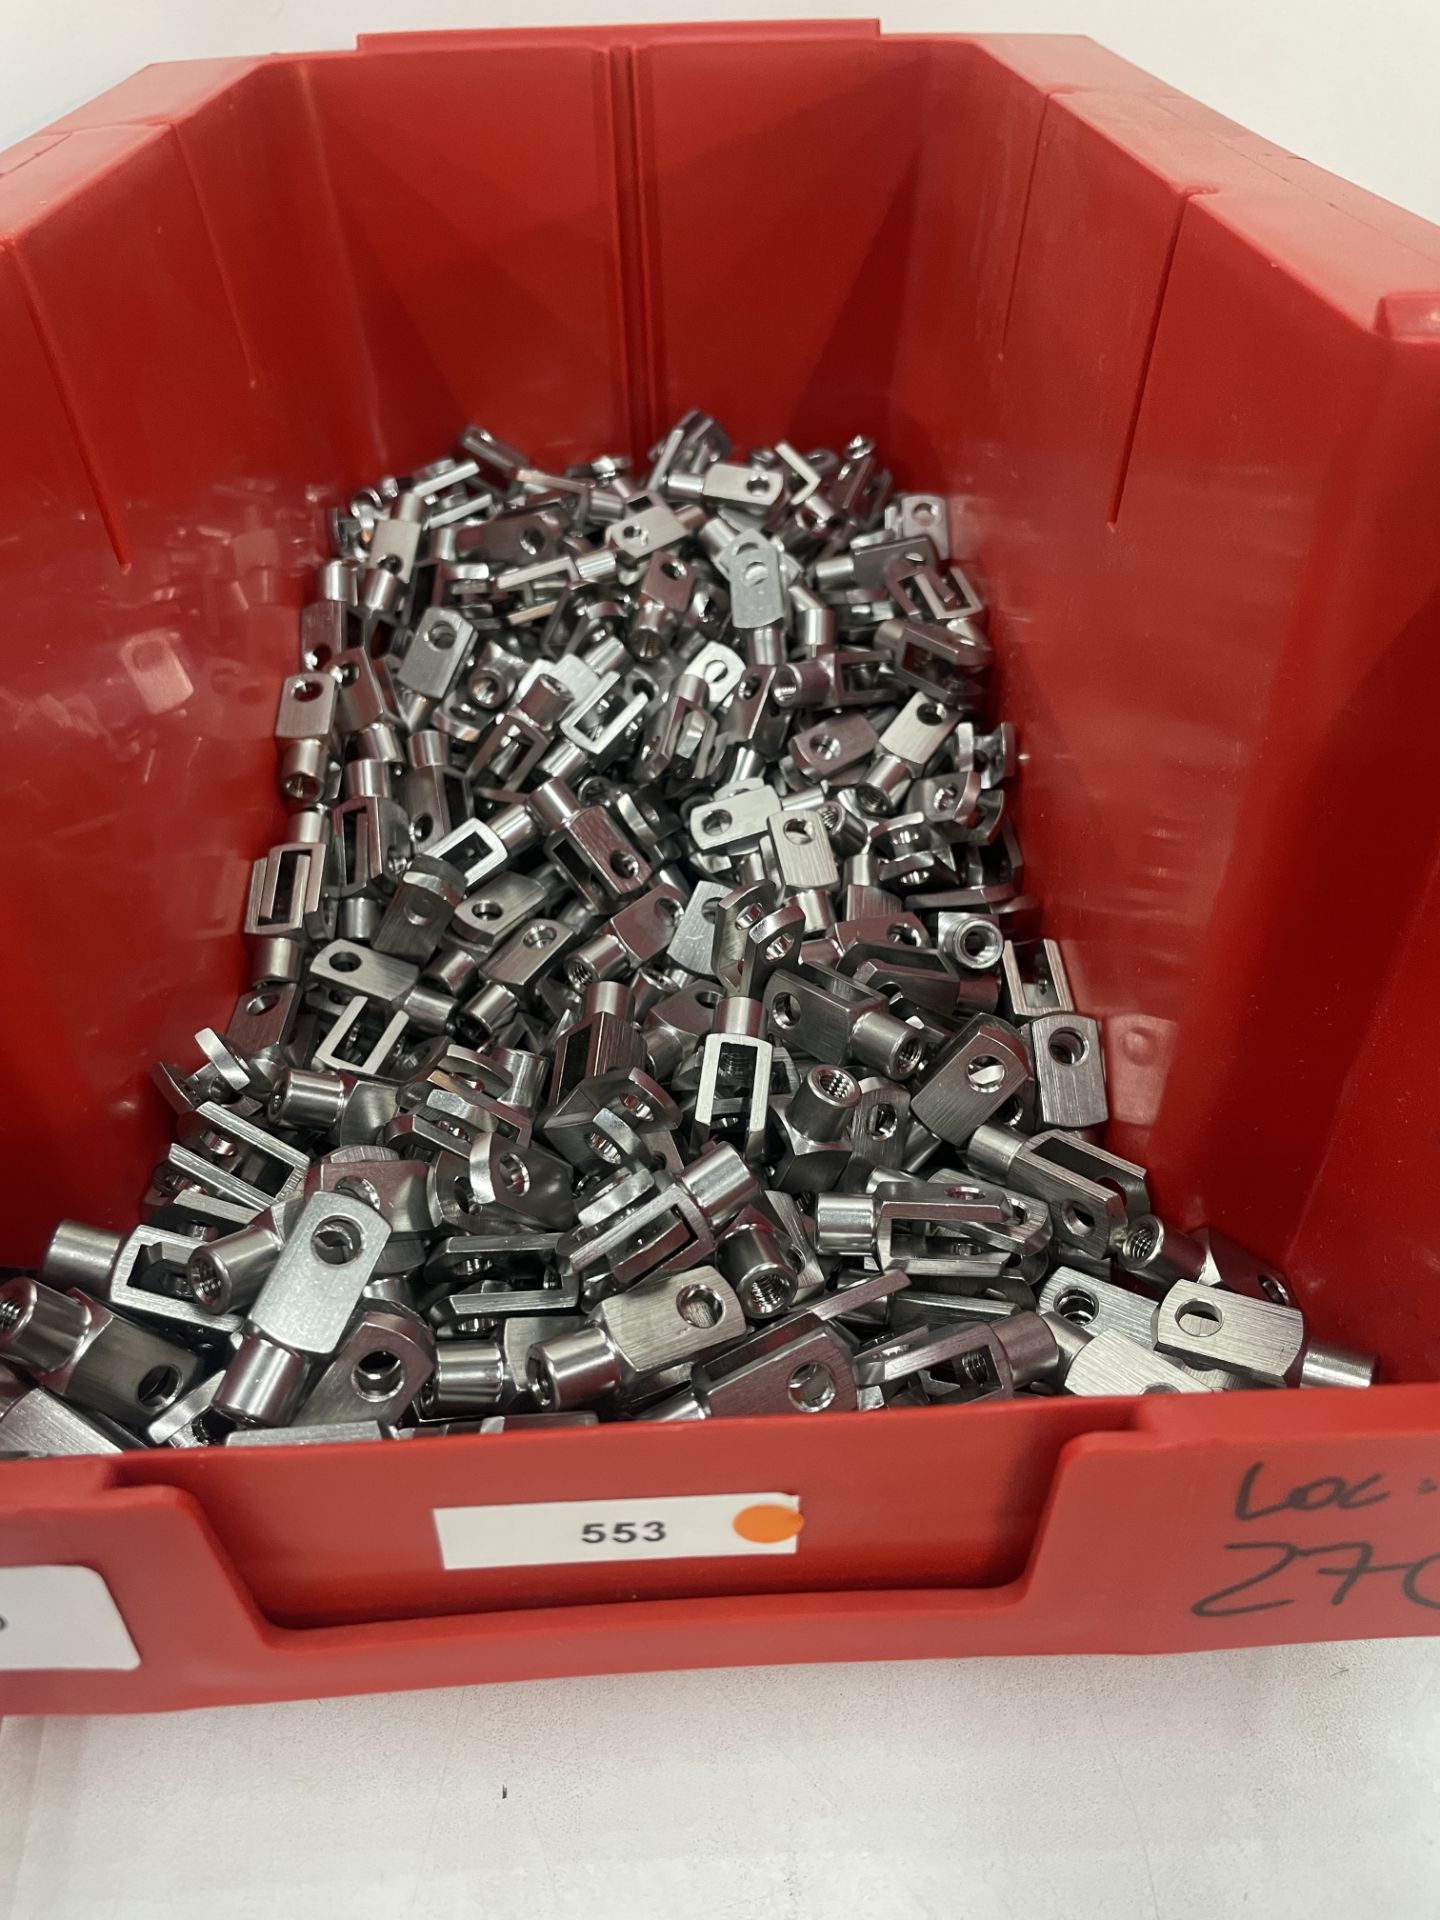 Approximately 500 x Stainless Steel Connectors